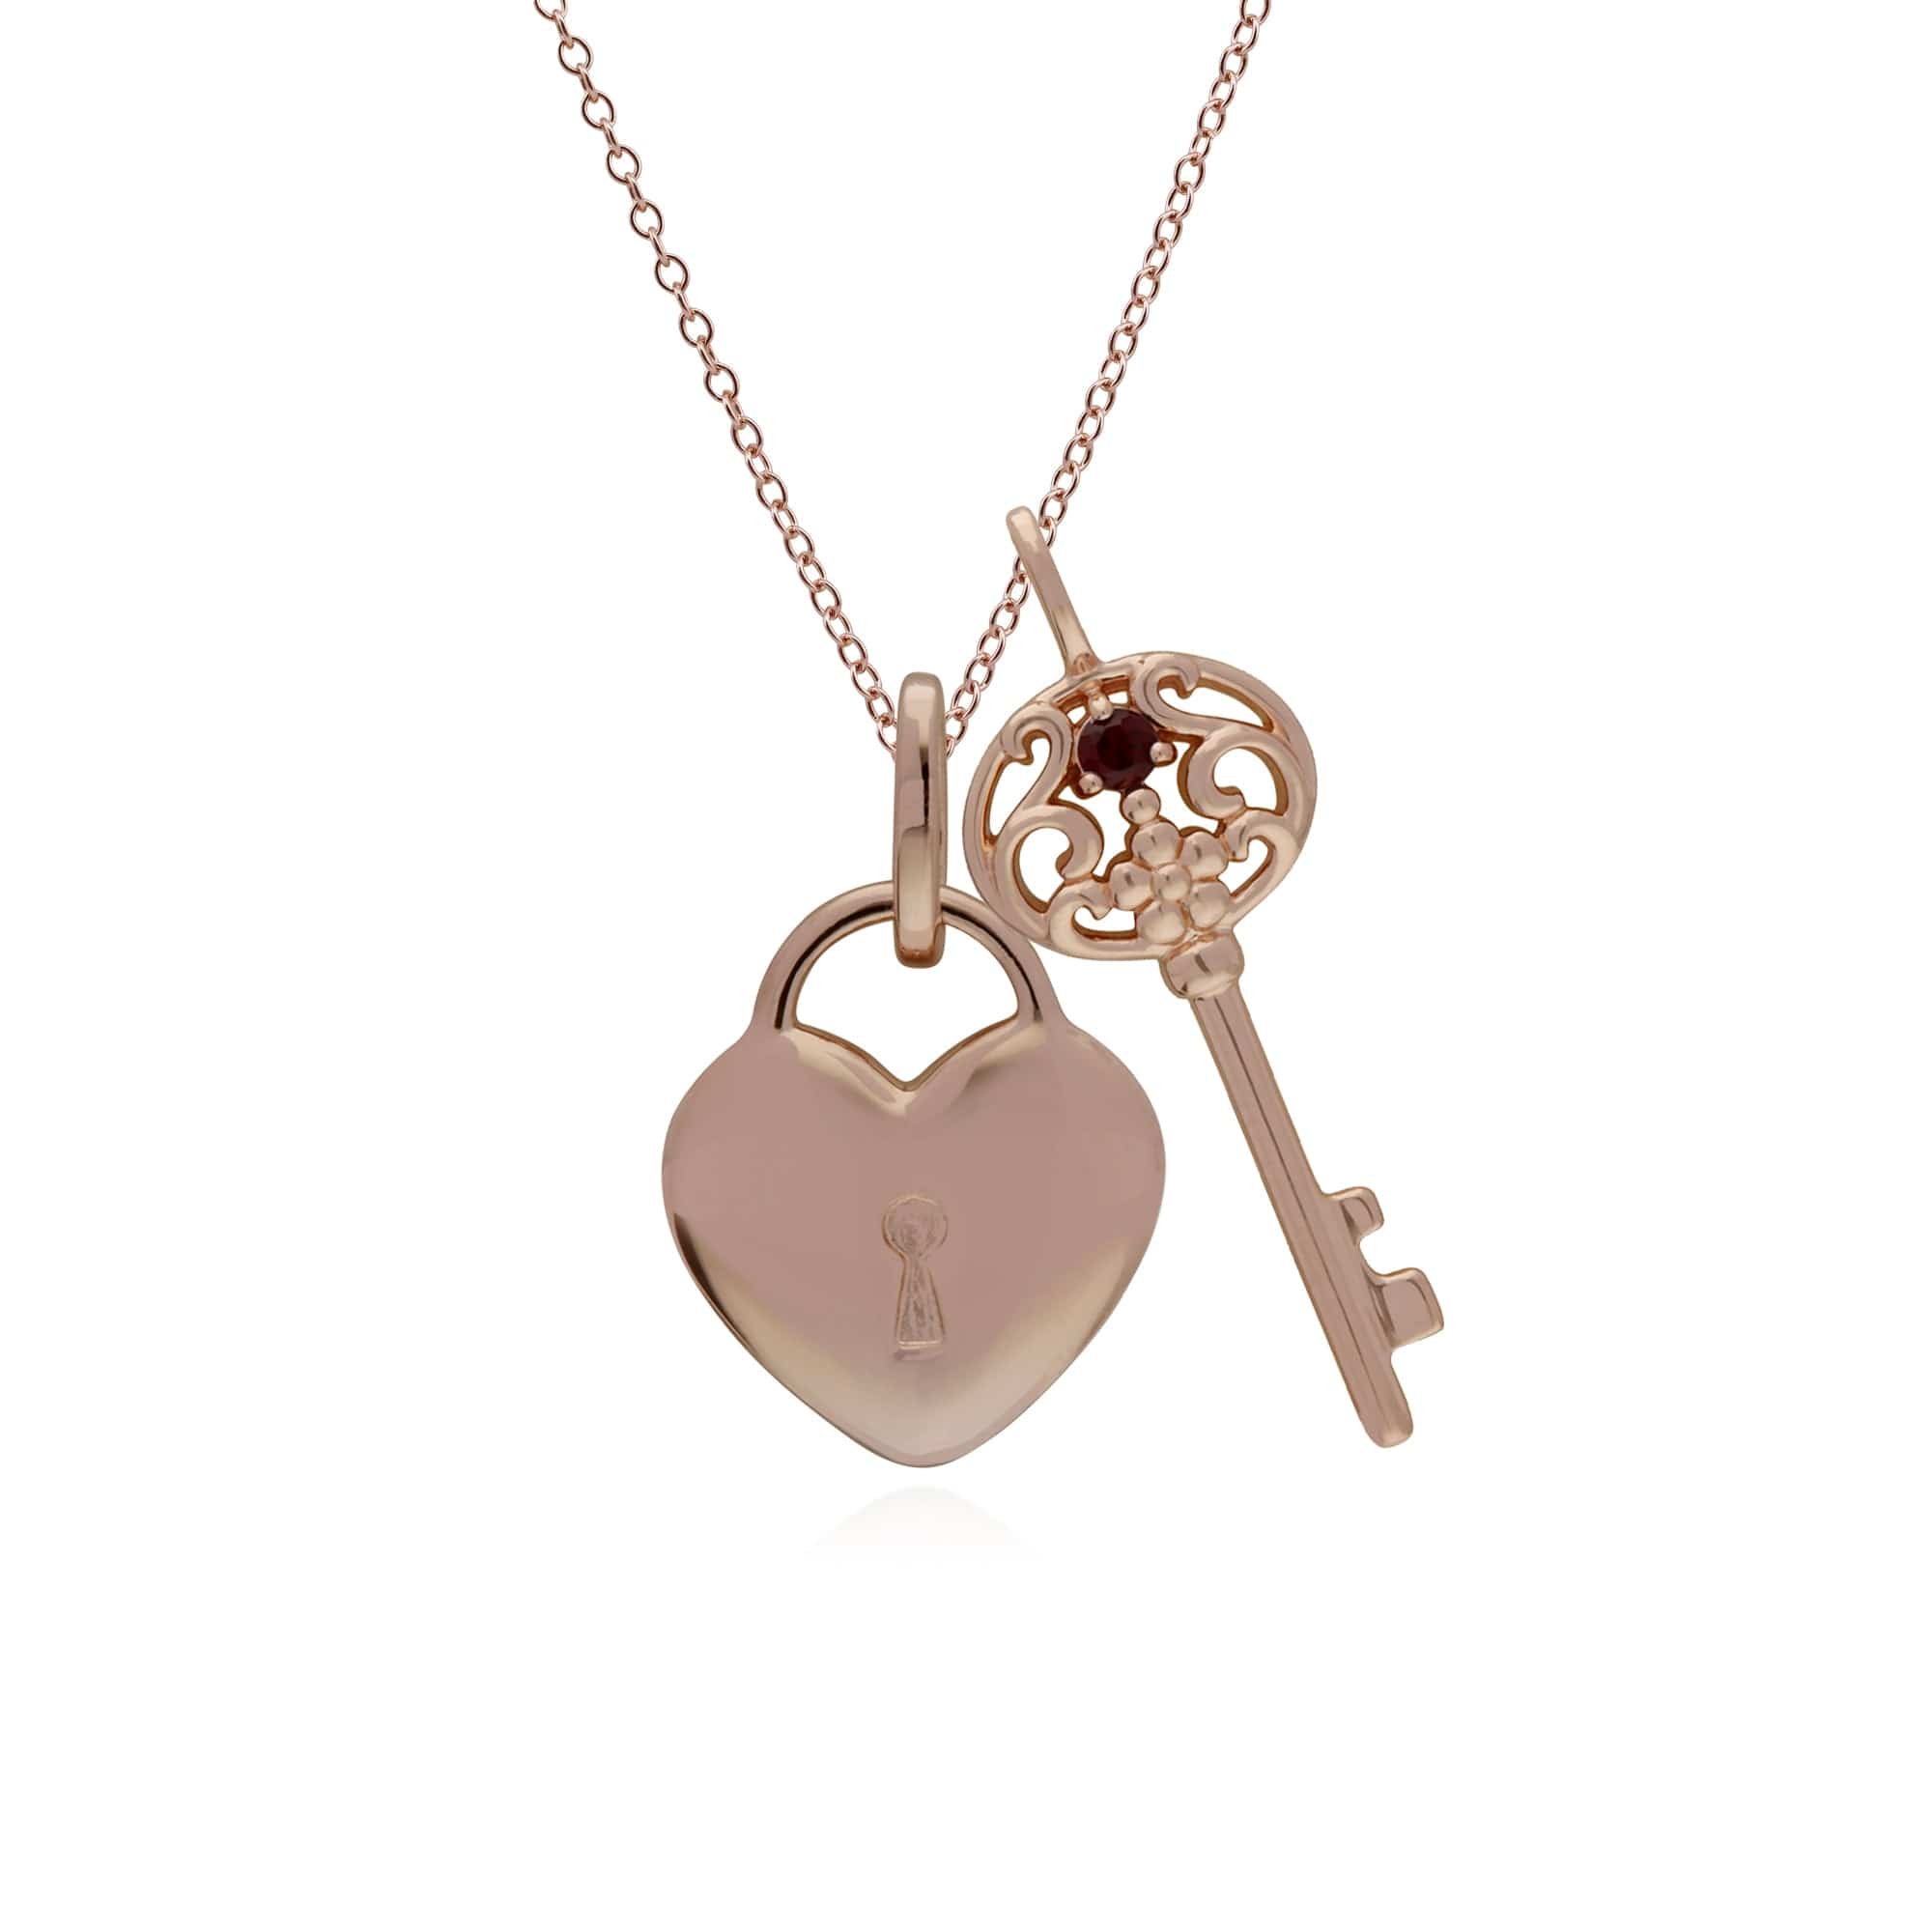 270P026707925-270P026901925 Classic Heart Lock Pendant & Garnet Big Key Charm in Rose Gold Plated 925 Sterling Silver 1